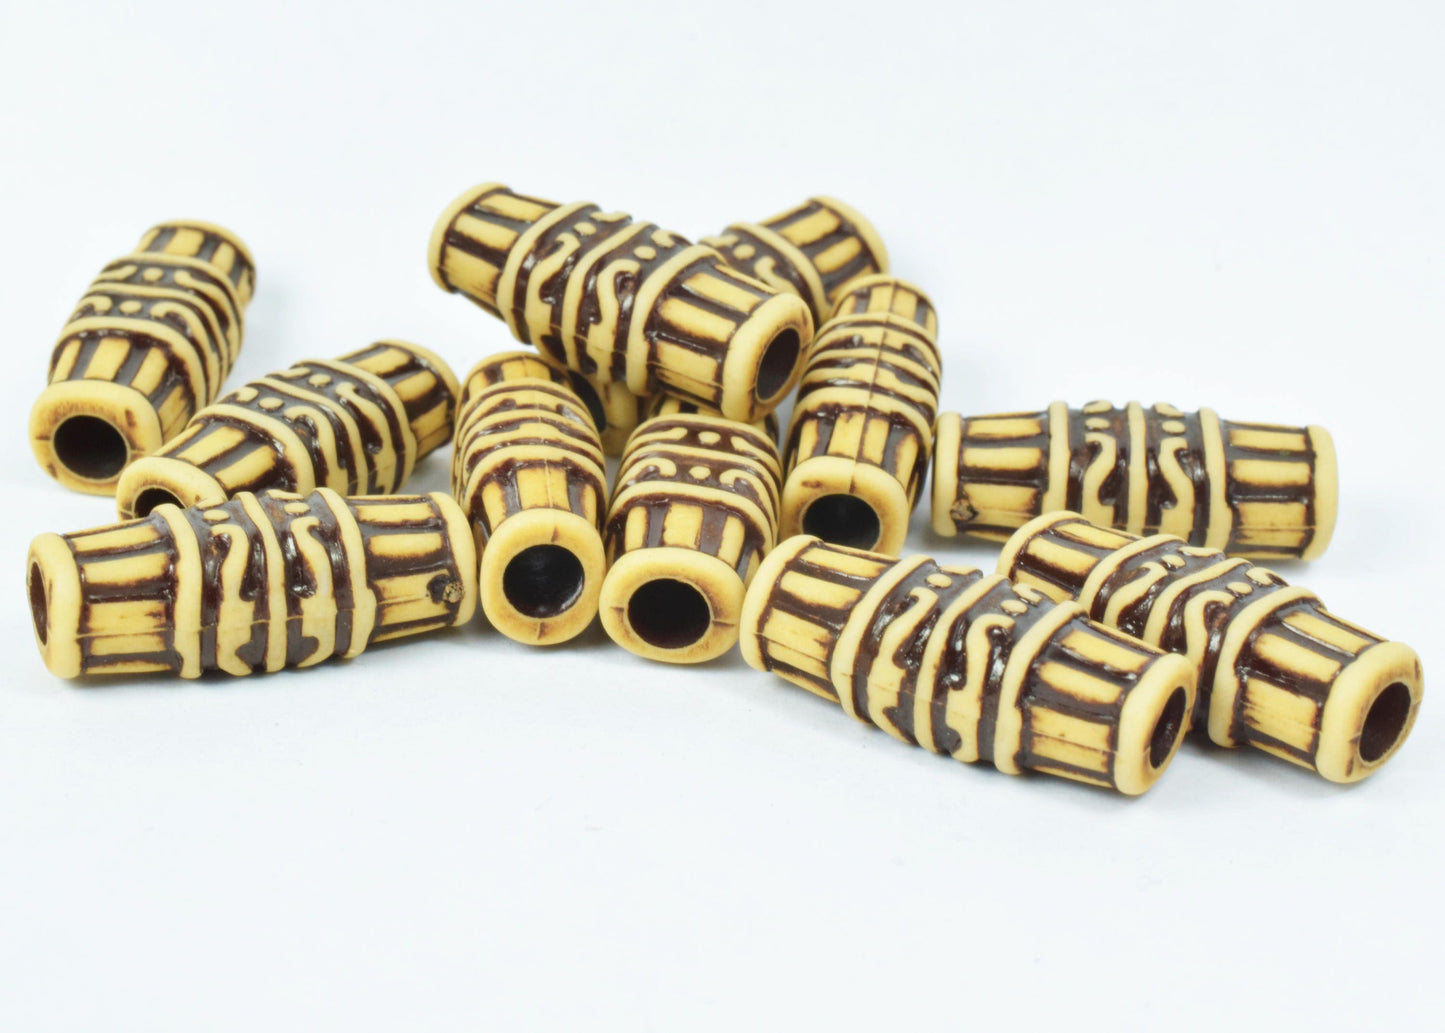 11x26mm African Tube Plastic Resin Beads, Sold by 100PCs, Wholesale beads, Plastic Beads, African Design Beads, 4mm hole opening,